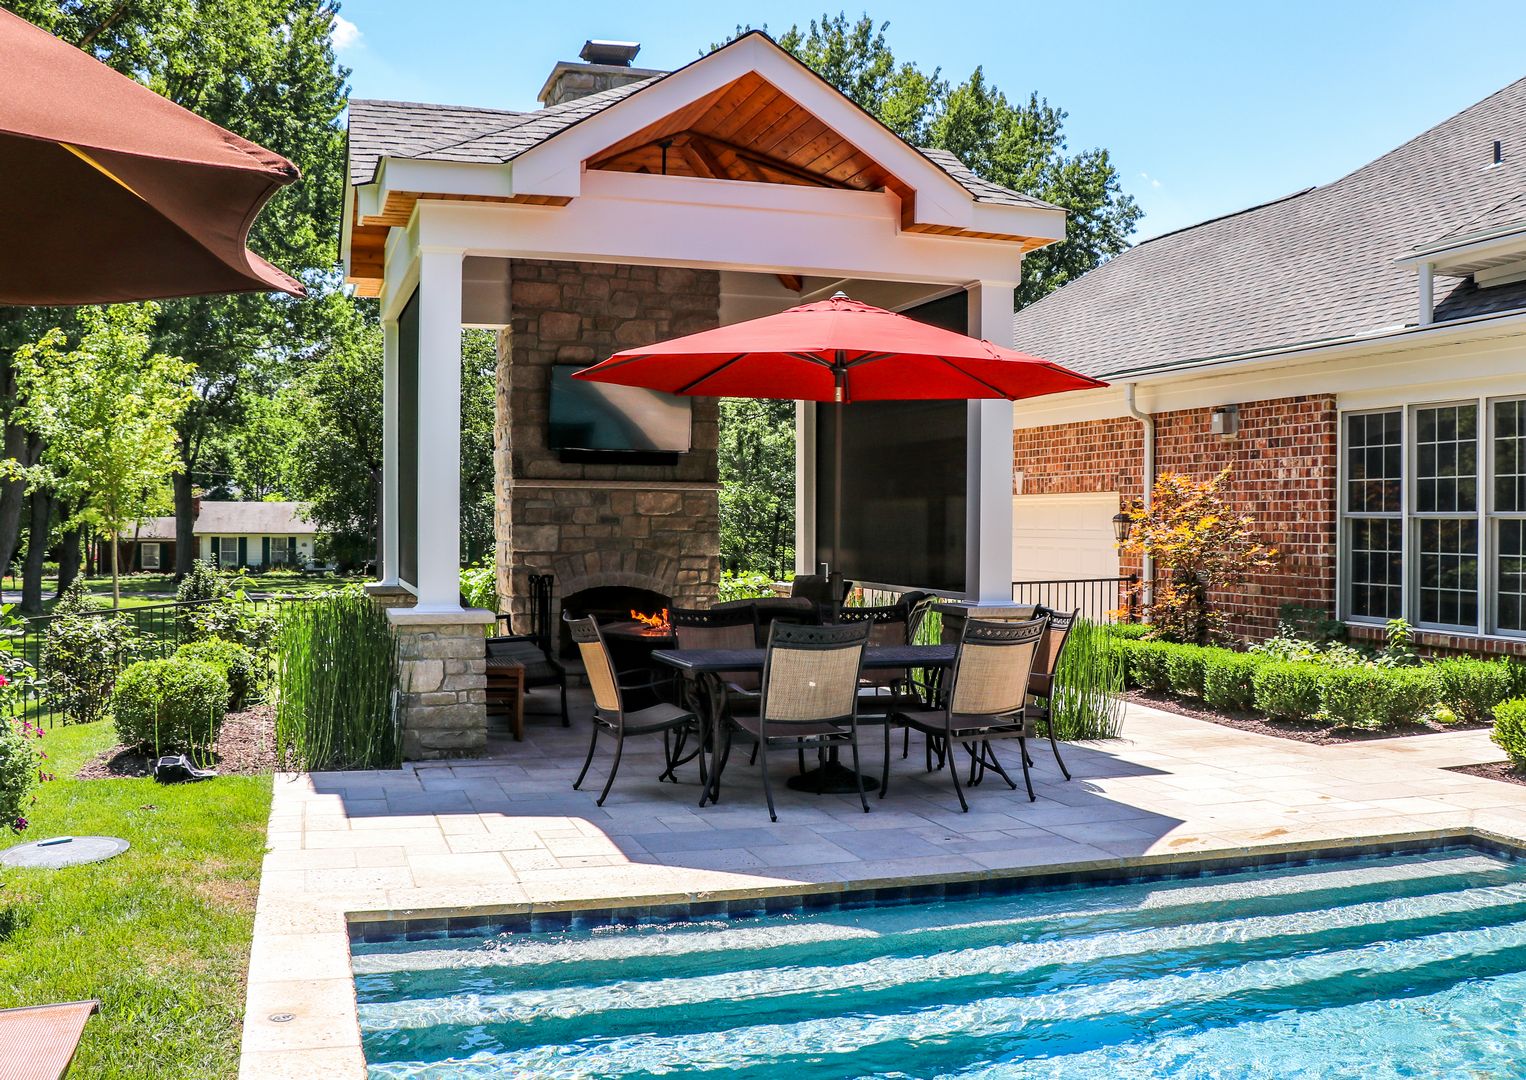 Pool side outdoor room with a beautiful fireplace feature and stone wall in the back